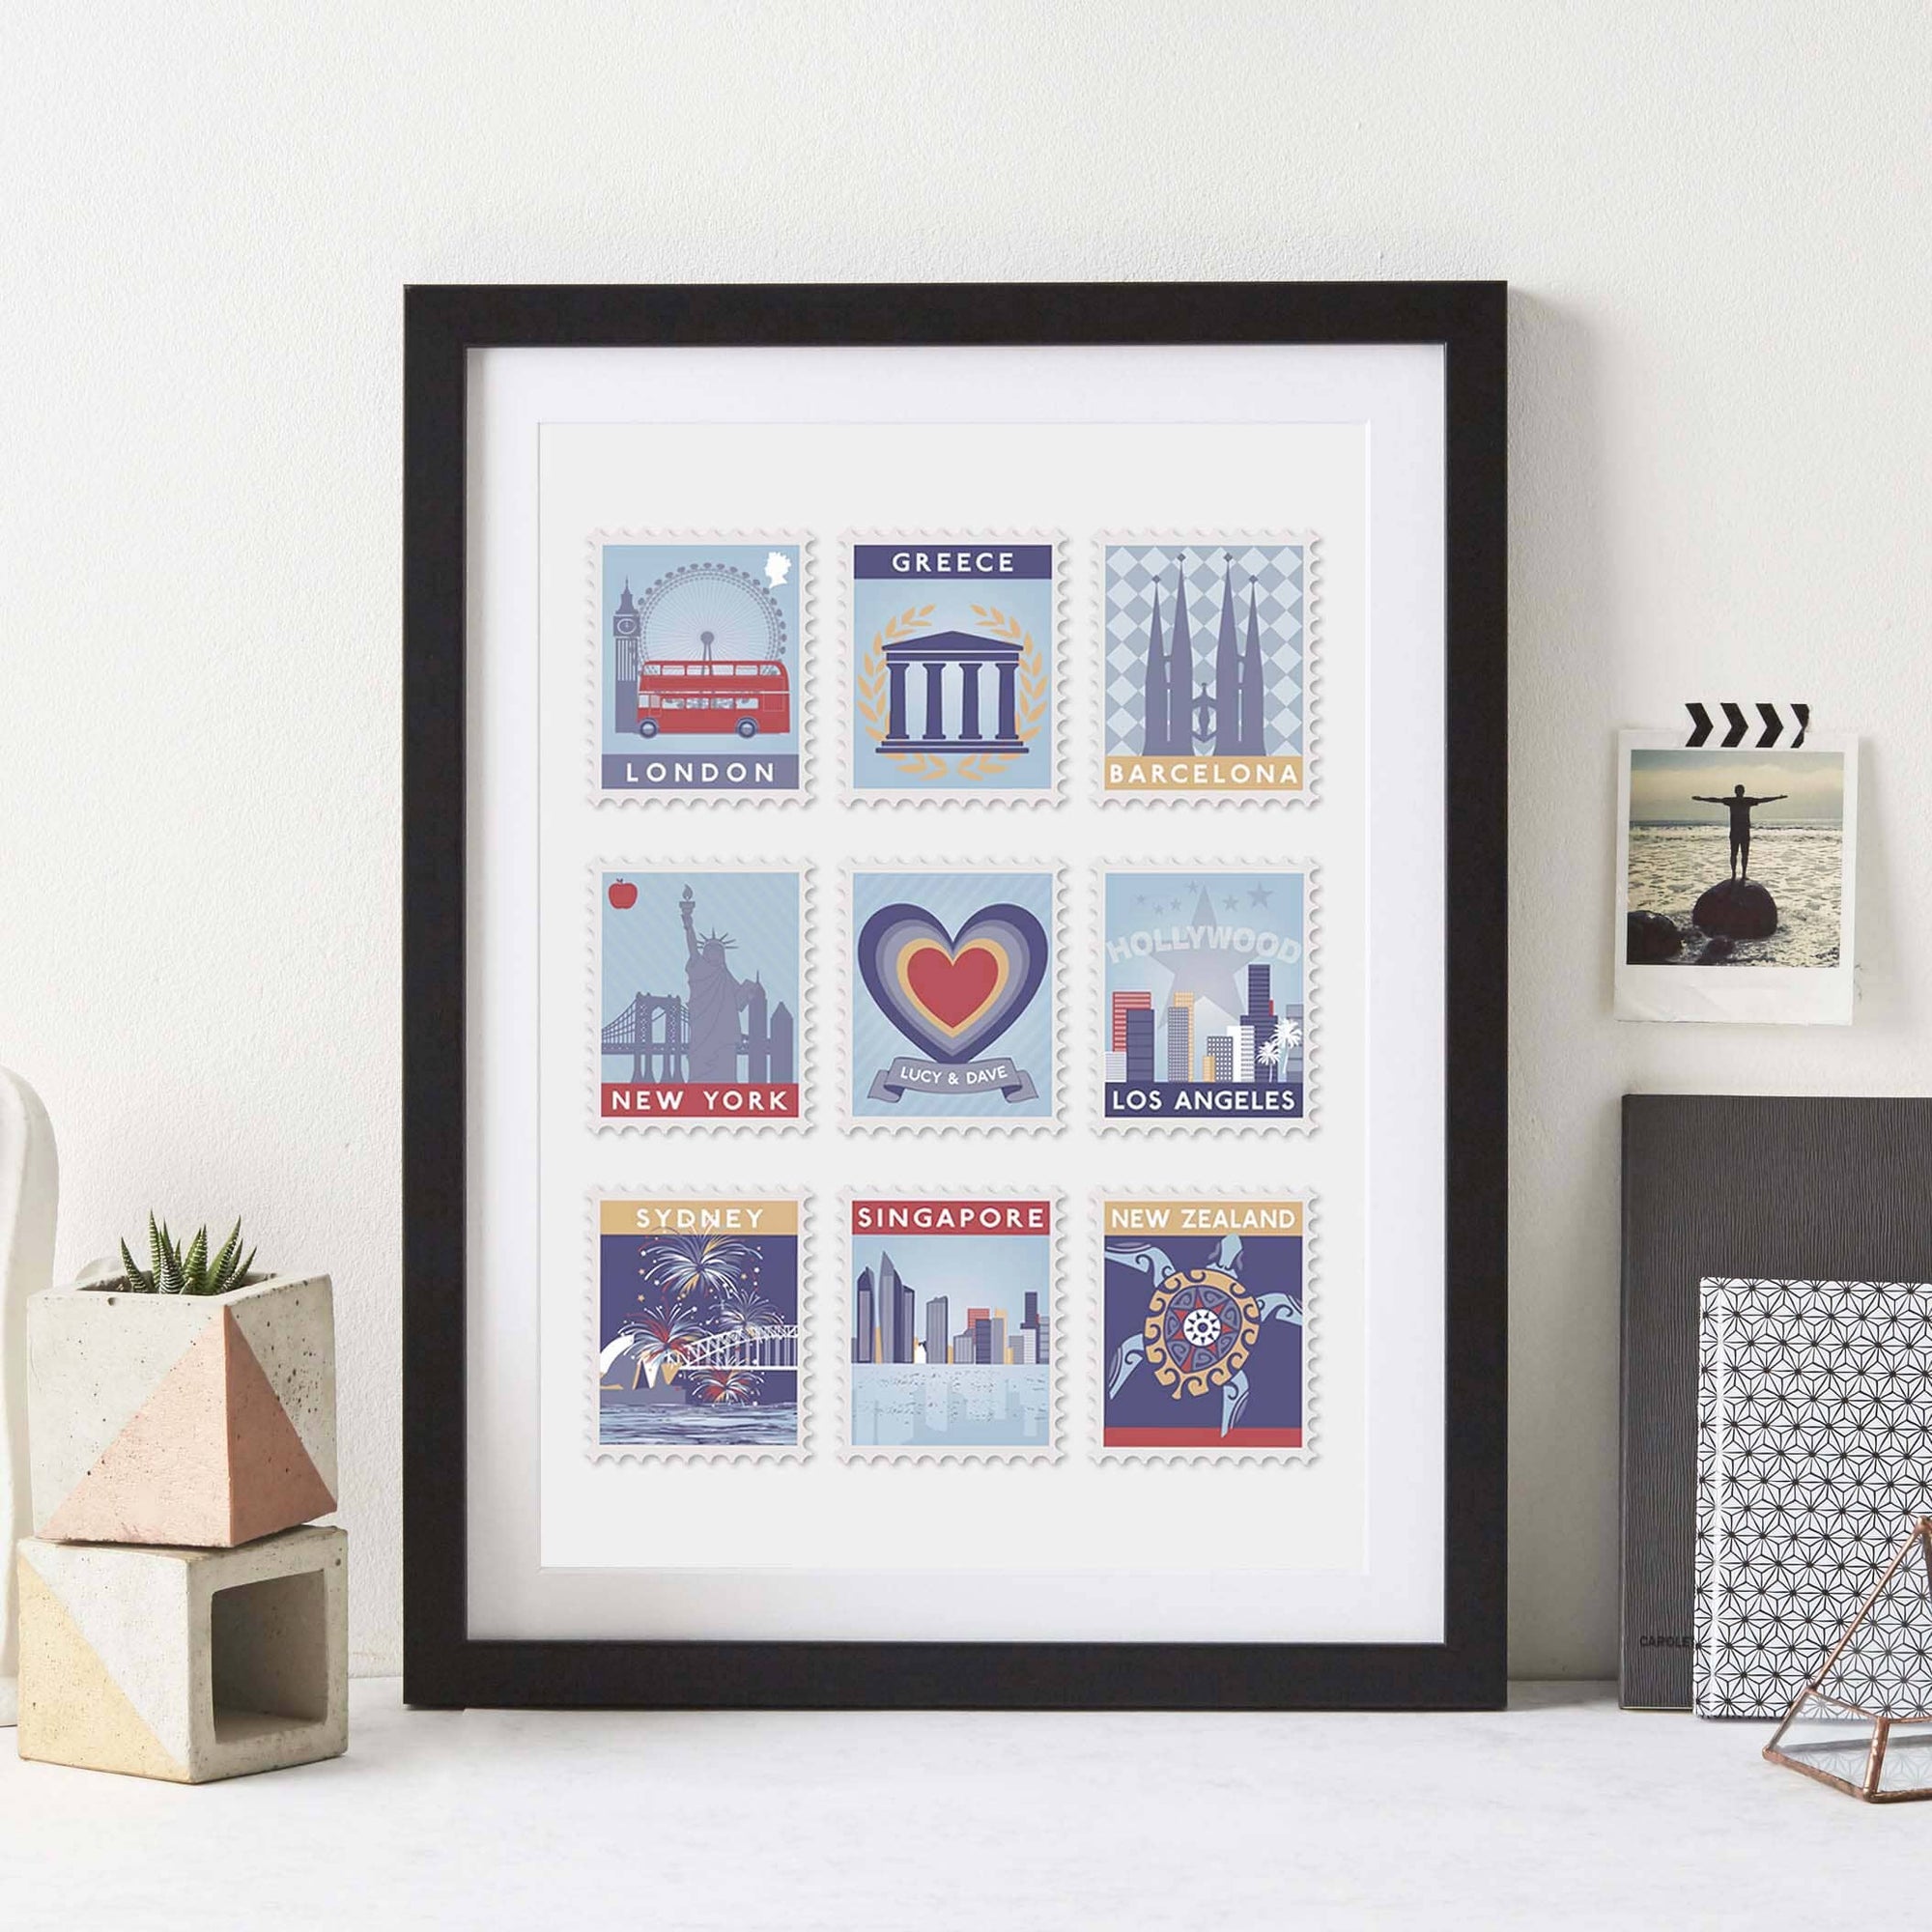 Unique and Personalised Gifts, Prints, Decorations and Home Designs